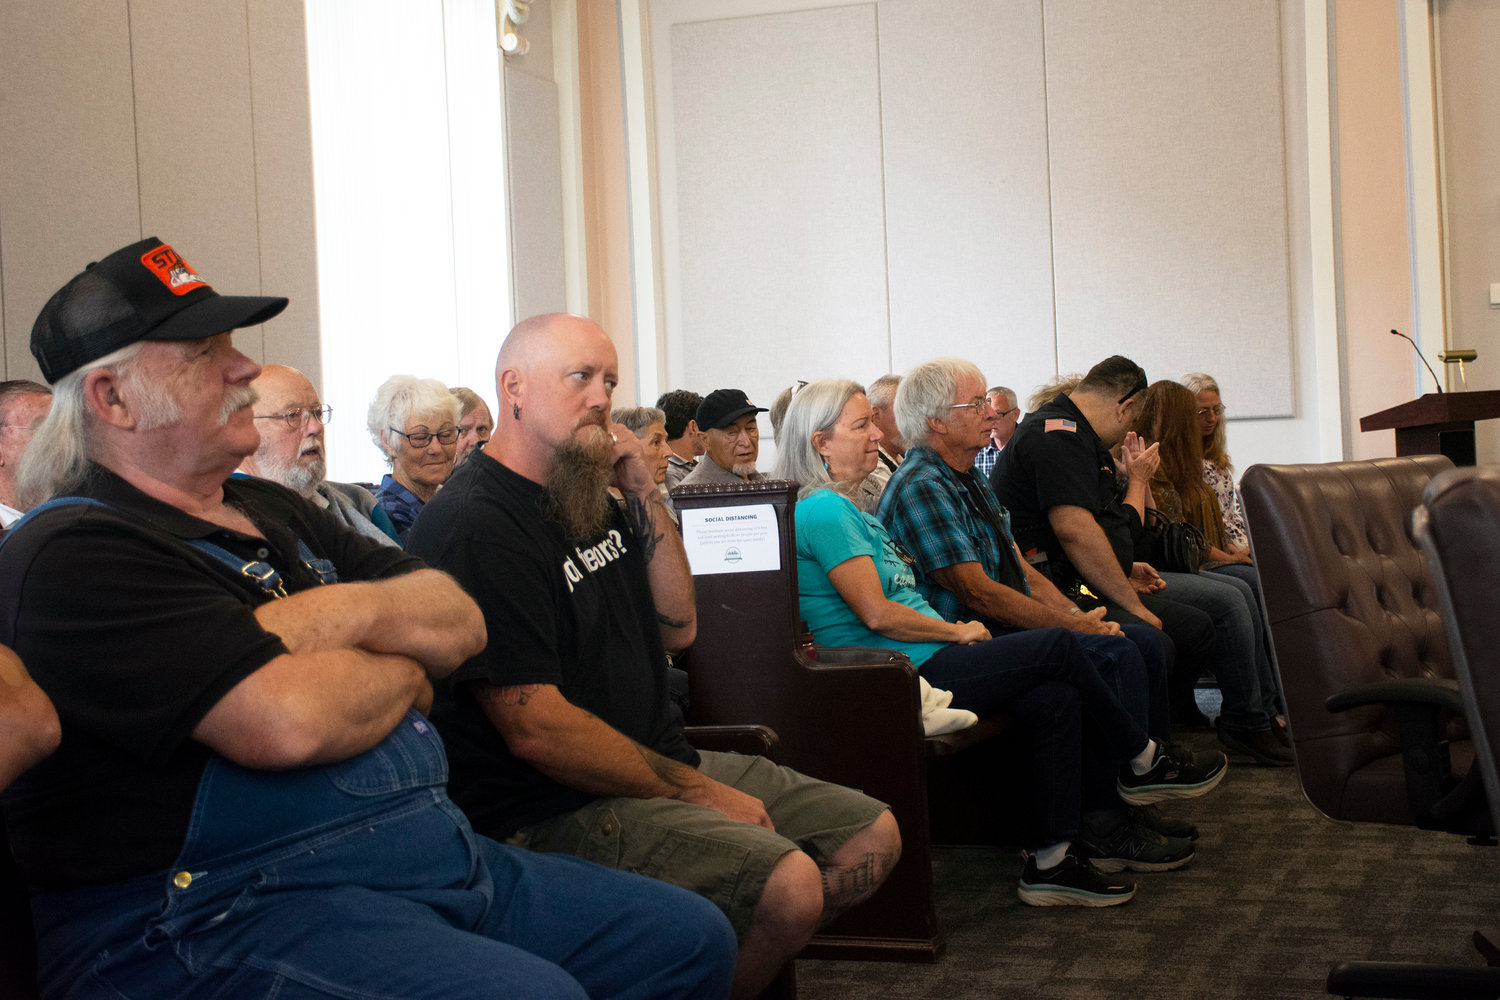 A crowd came to watch Lewis County commissioners adopt a "Citizens' Rights" proclamation Tuesday, a document affirming officials' oath to the constitution.